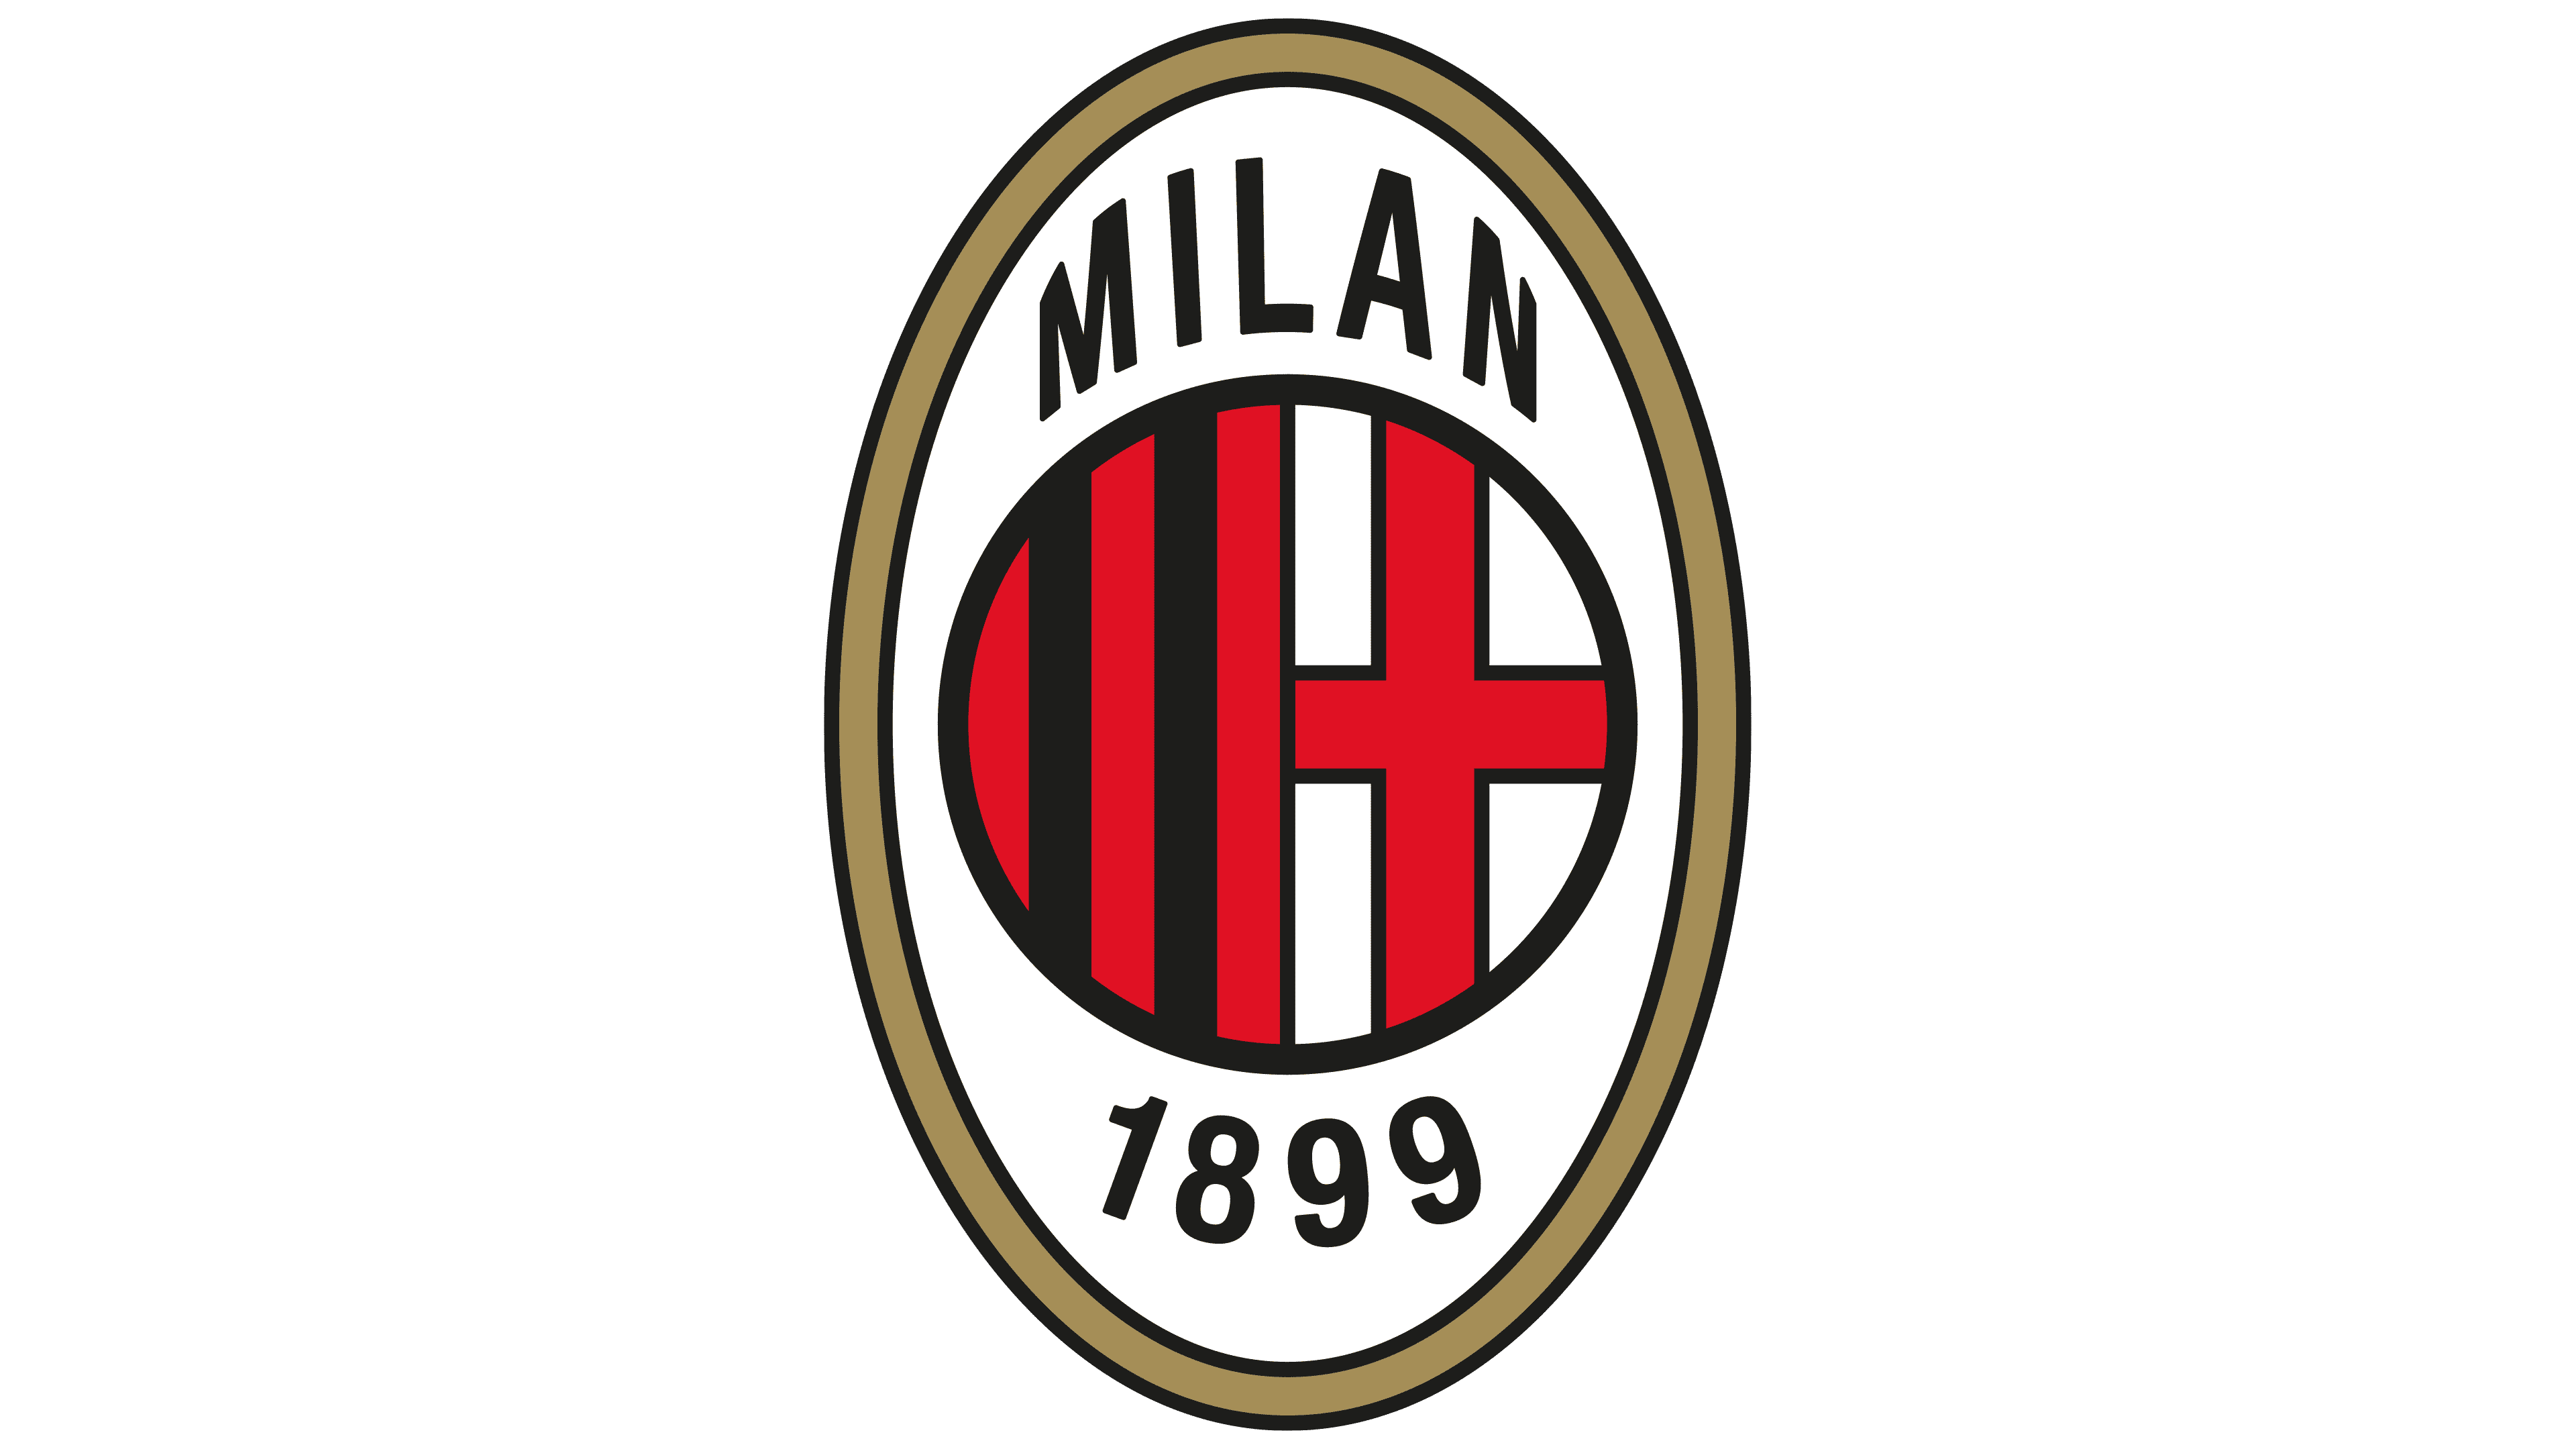 Milan Logo The Most Famous Brands And Company Logos In The World